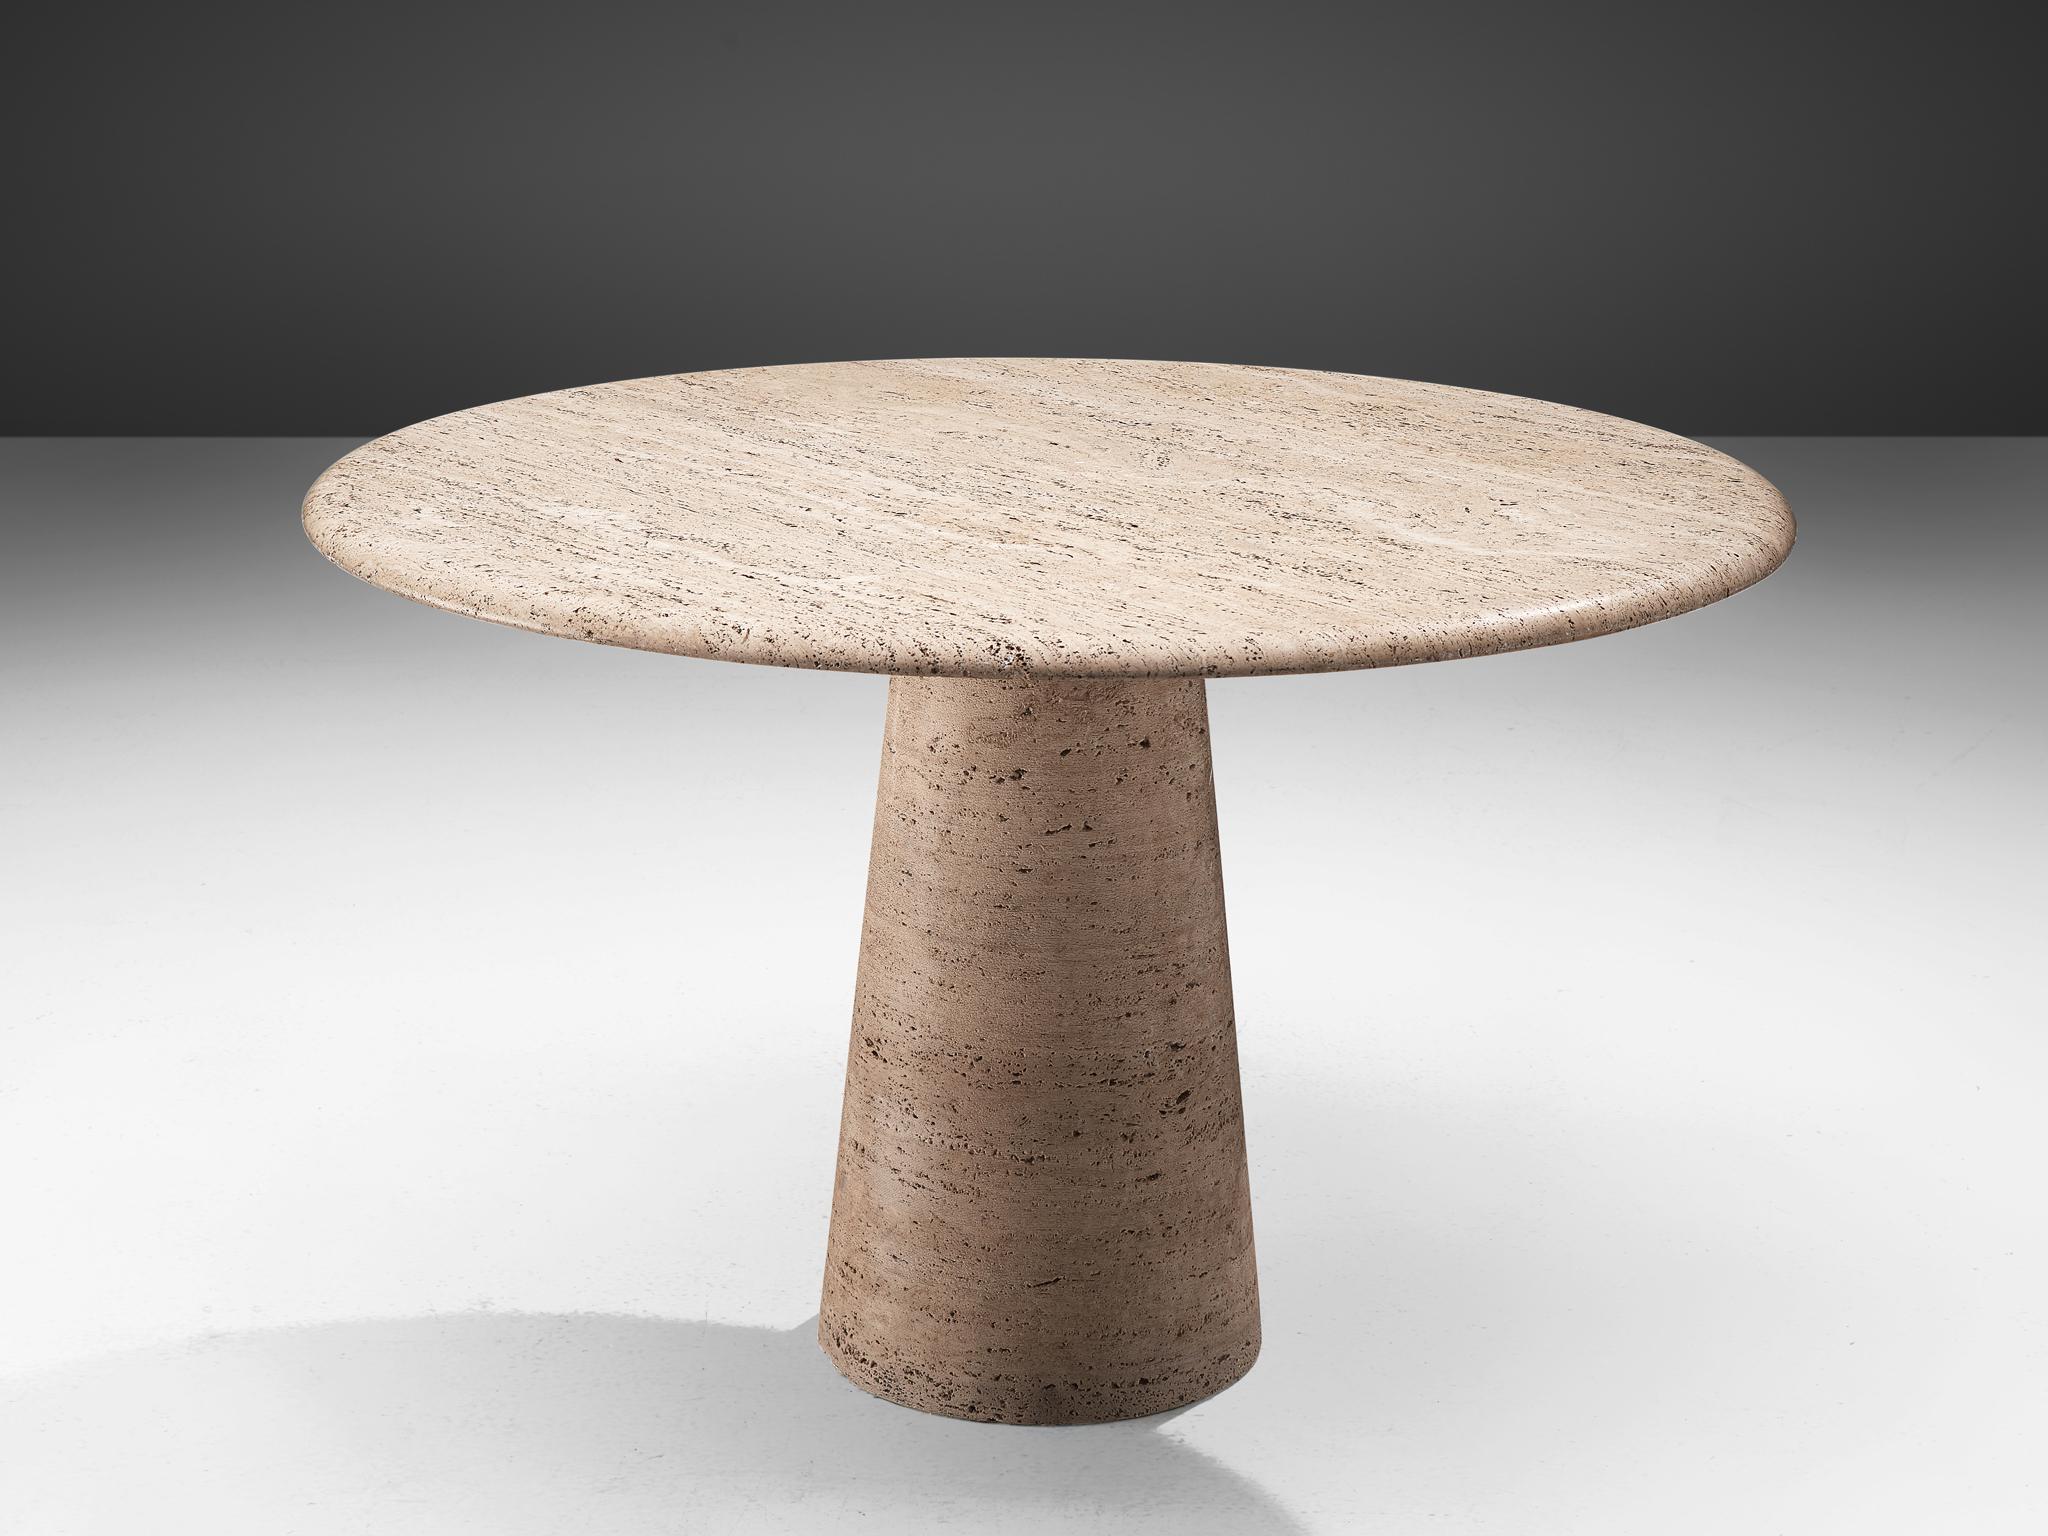 Centre table, travertine, Europe, 1970s.

This solid dining table features a colon, cone shaped foot and a thick circular travertine tabletop. The aesthetics are archetypical for postmodern design, bearing references to architectural forms and